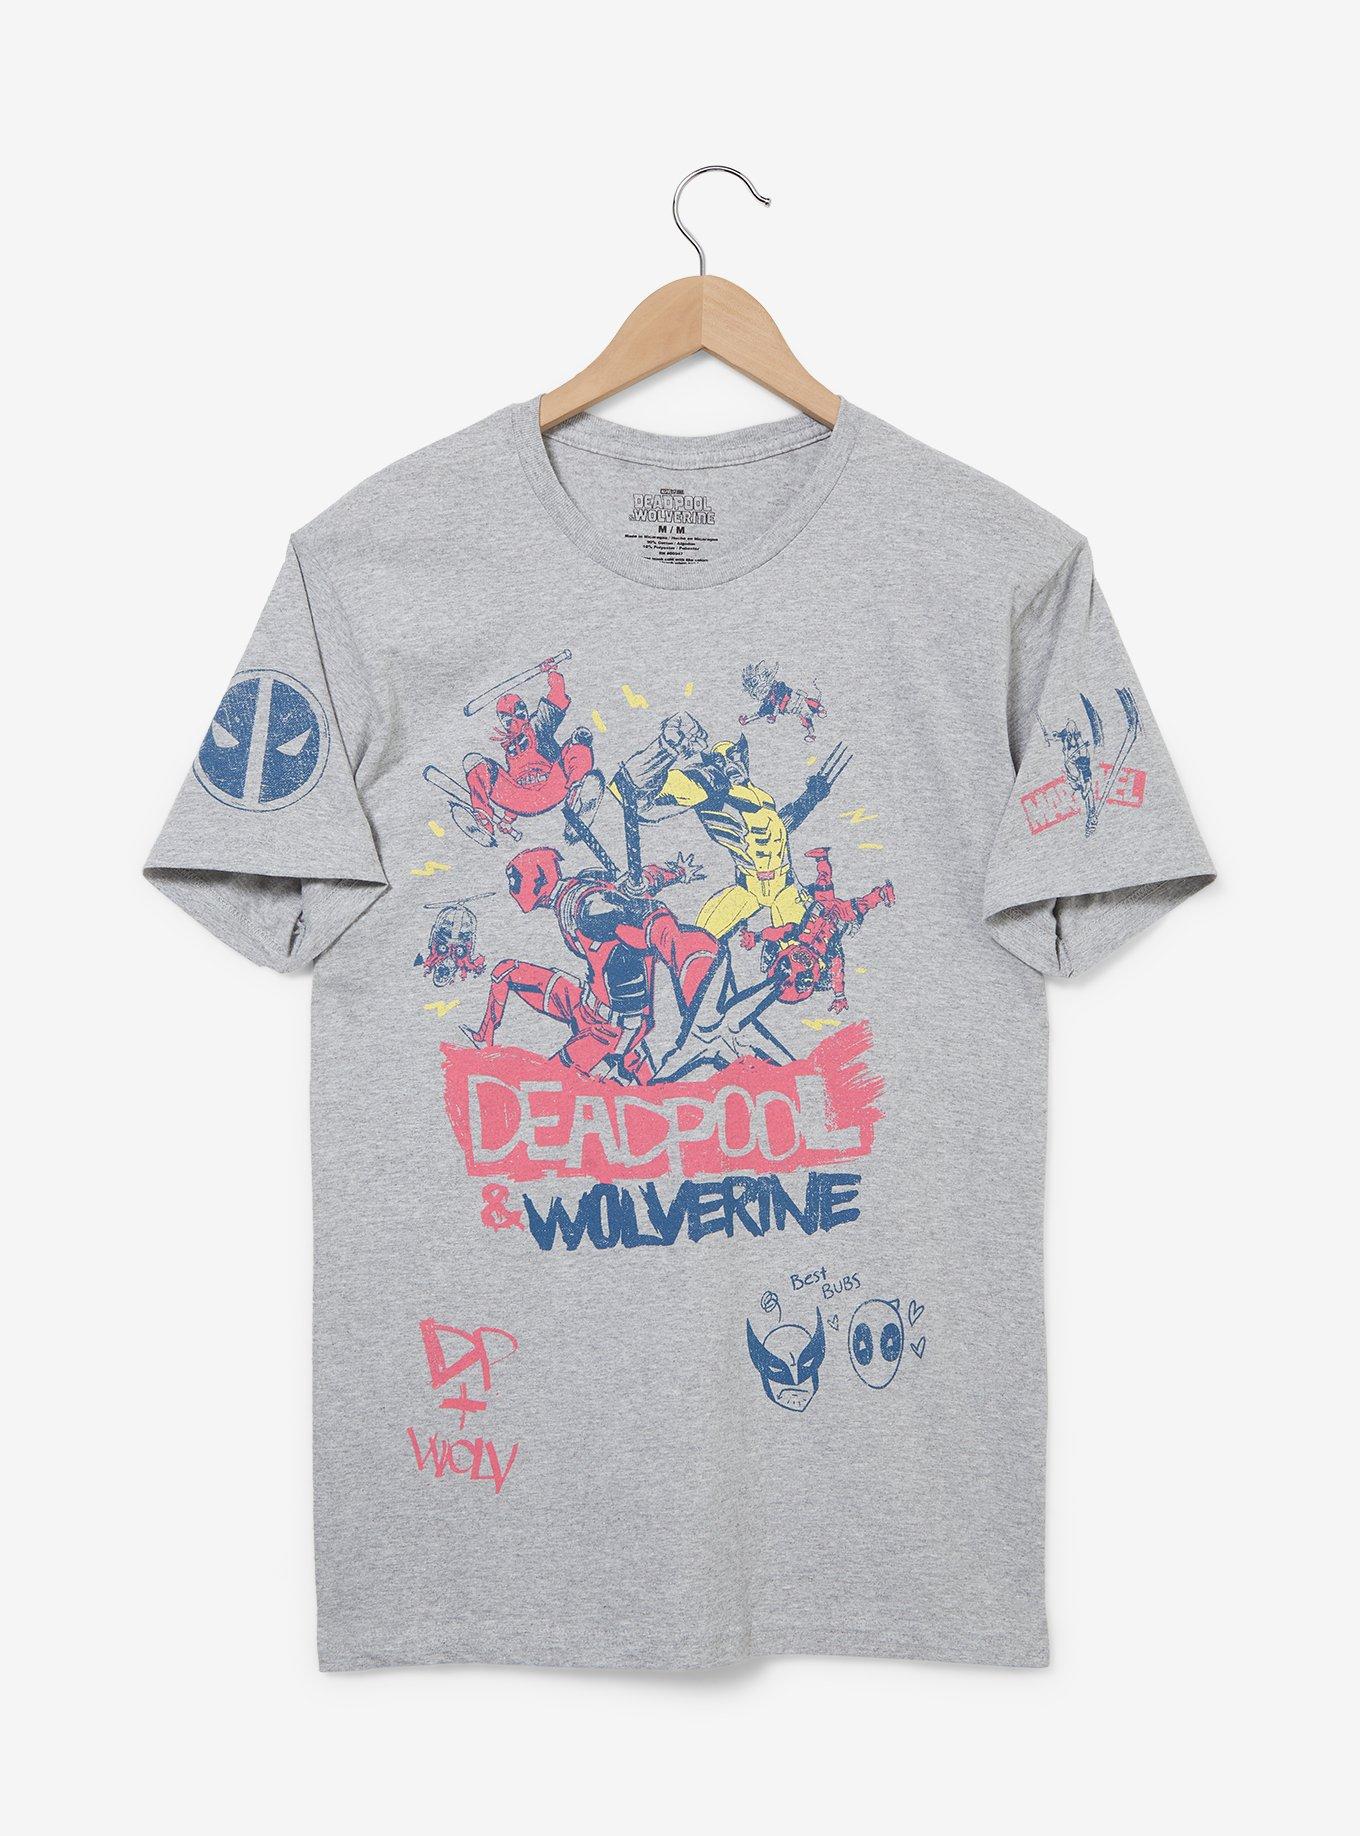 Marvel Deadpool & Wolverine Doodle Icons T-Shirt - BoxLunch Exclusive